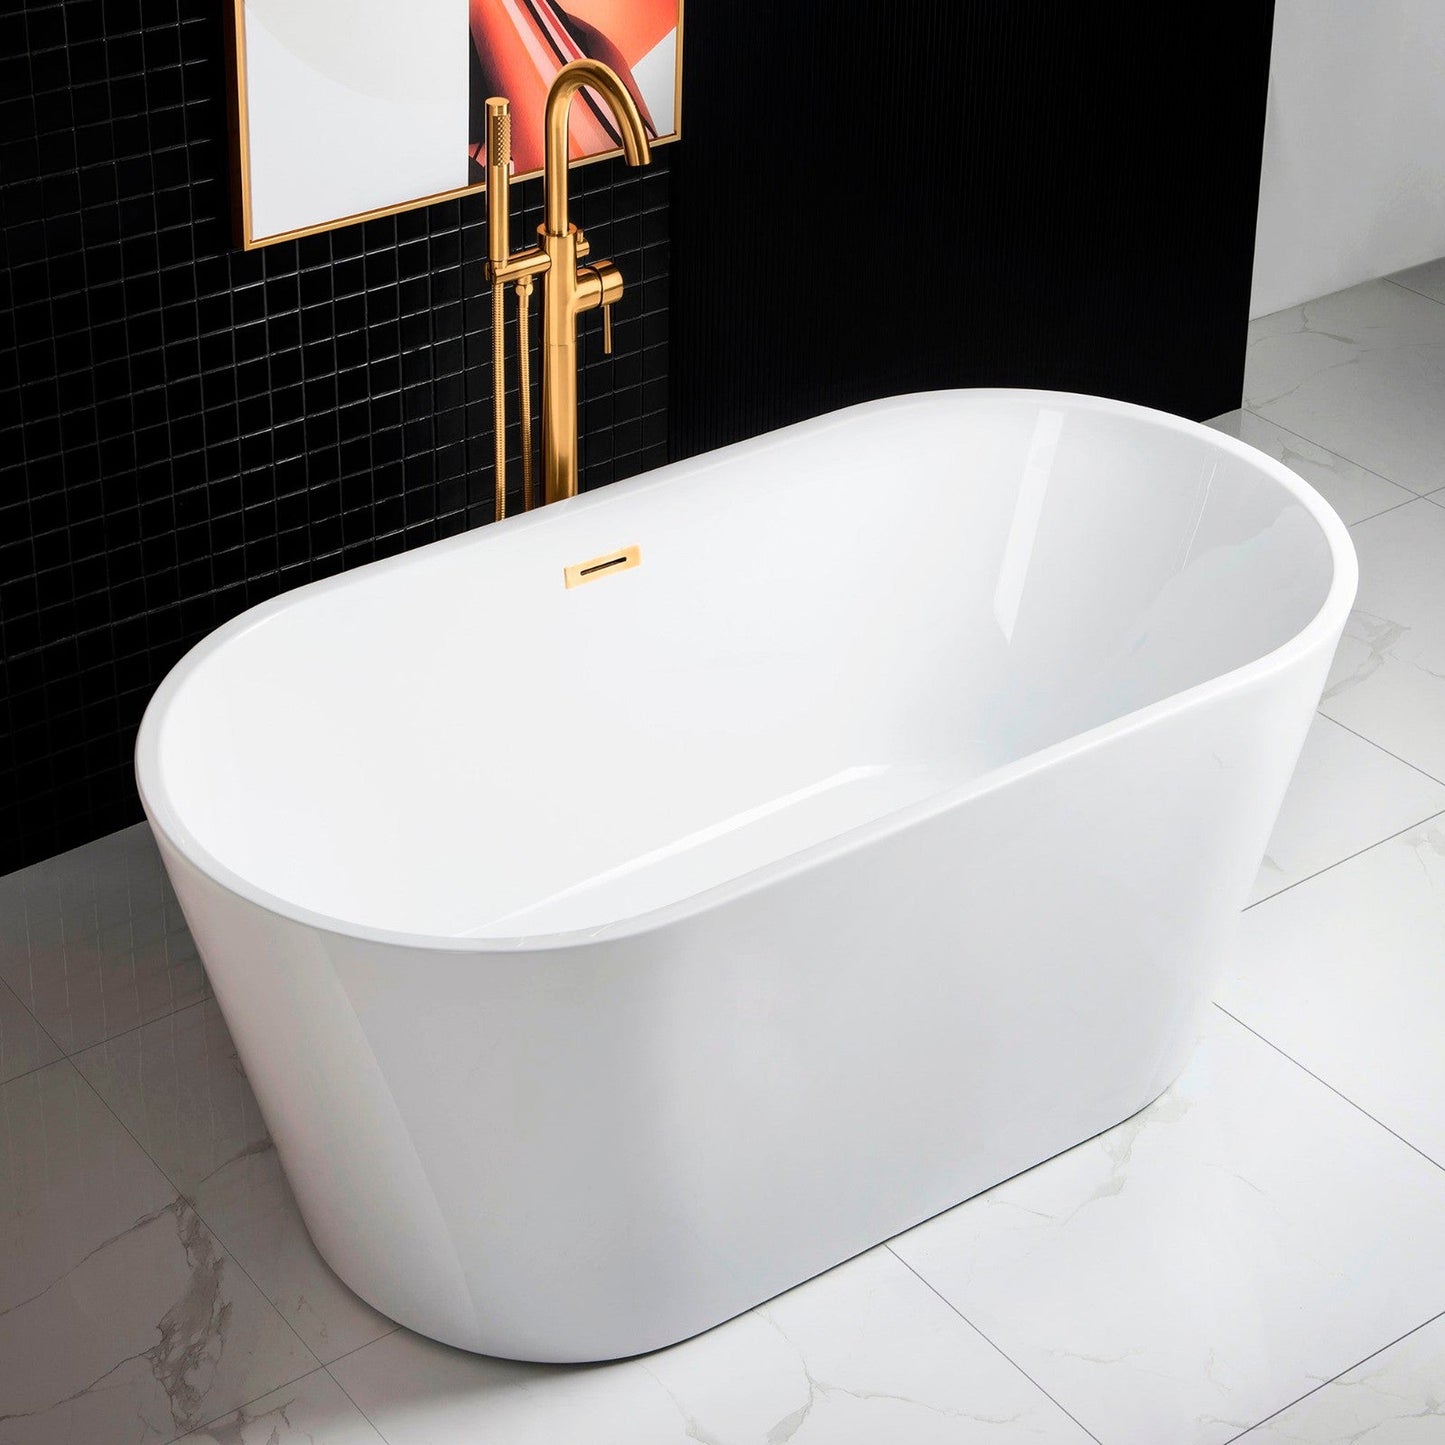 WoodBridge B0014 59" White Acrylic Freestanding Soaking Bathtub With Brushed Gold Drain, Overflow, F-0007BGRD Tub Filler and Caddy Tray